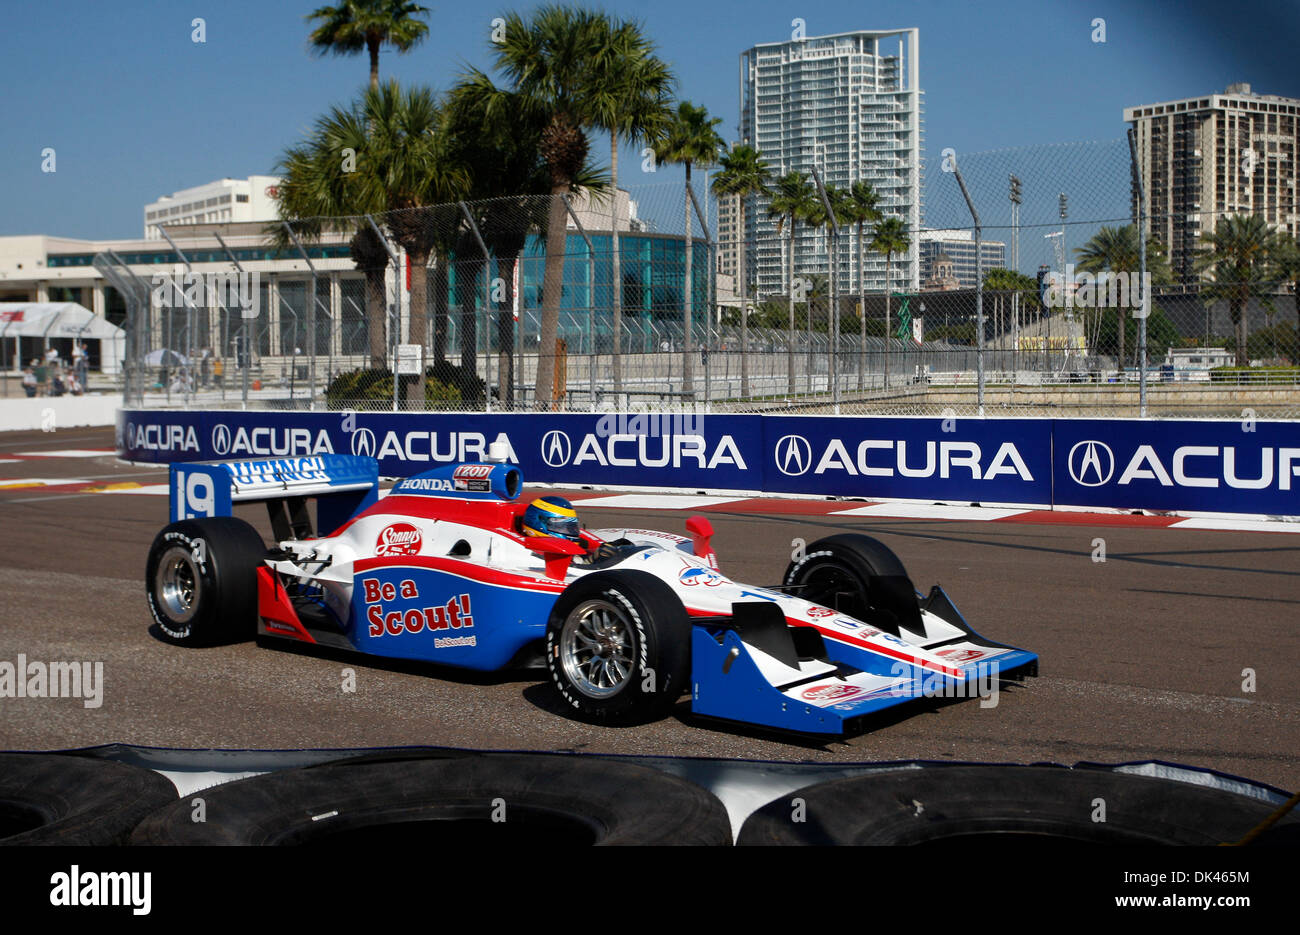 Mar. 25, 2011 - St. Pete, FL - DIRK SHADD   |  Times .SP_336219_SHAD_GRANDPRIX_02 (03/25/11 ST. PETE) IndyCar driver Sebastien Bourdais (car 19), with Dale Coybe Racing, makes his way through turn 10 with the Mahaffey Theater and the city of St. Petersburg in the background during the IndyCar morning practice on the opening day of the Honda Grand Prix of St. Petersburg Friday (03/2 Stock Photo